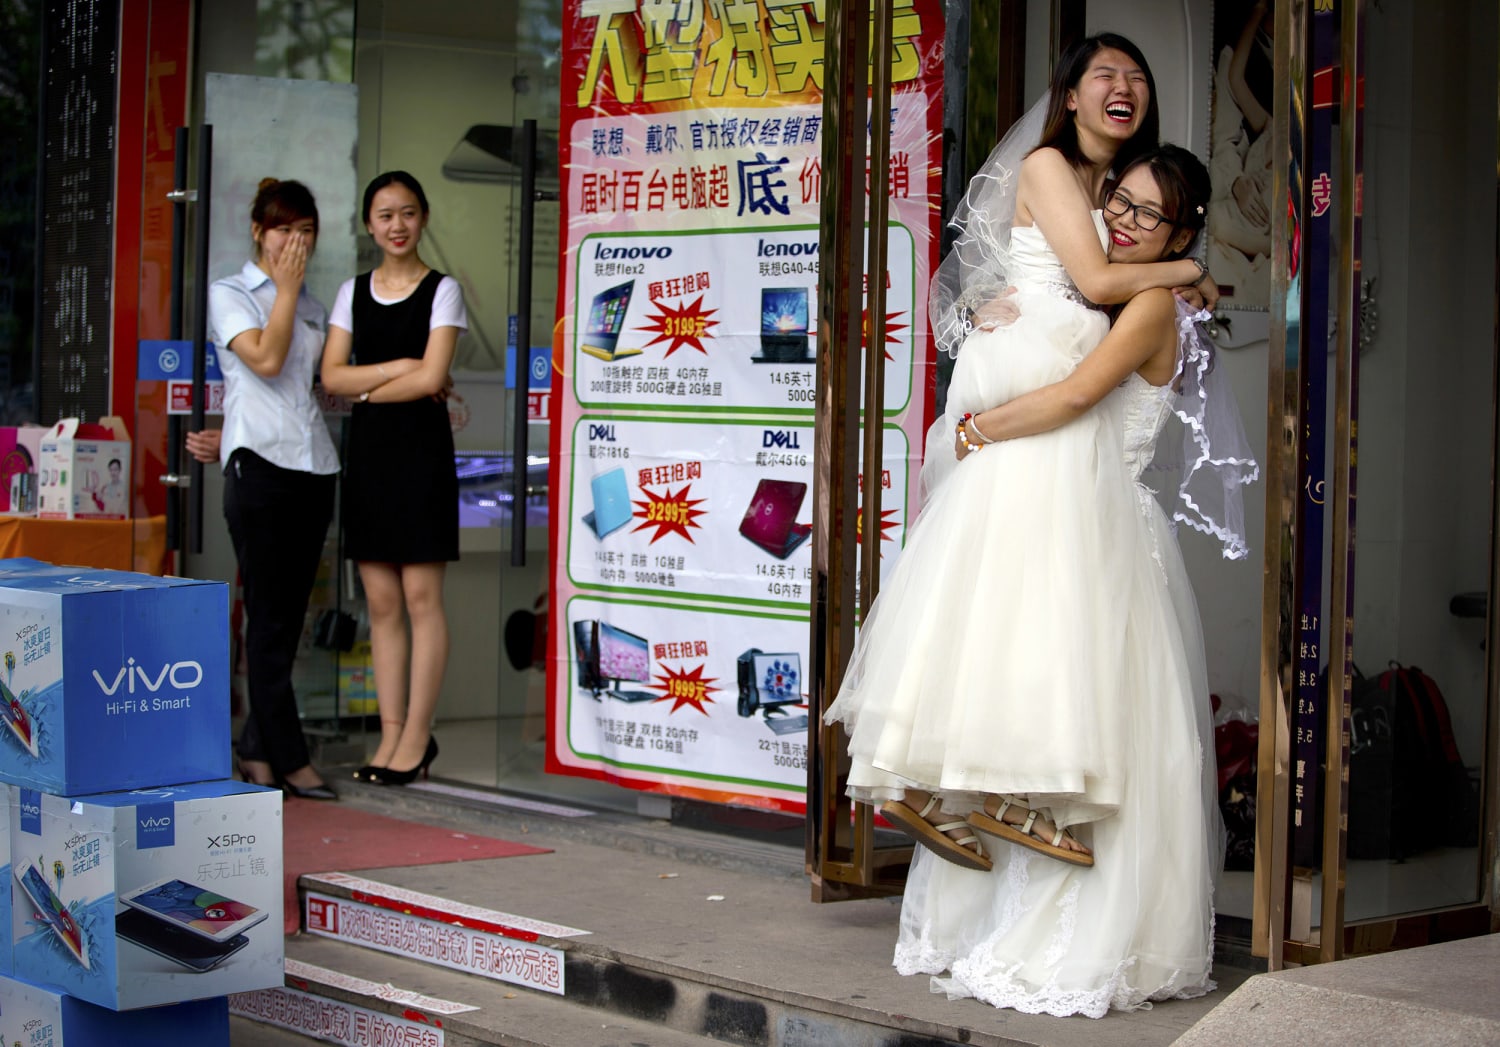 Why is China raising the prospect of same-sex marriage? photo